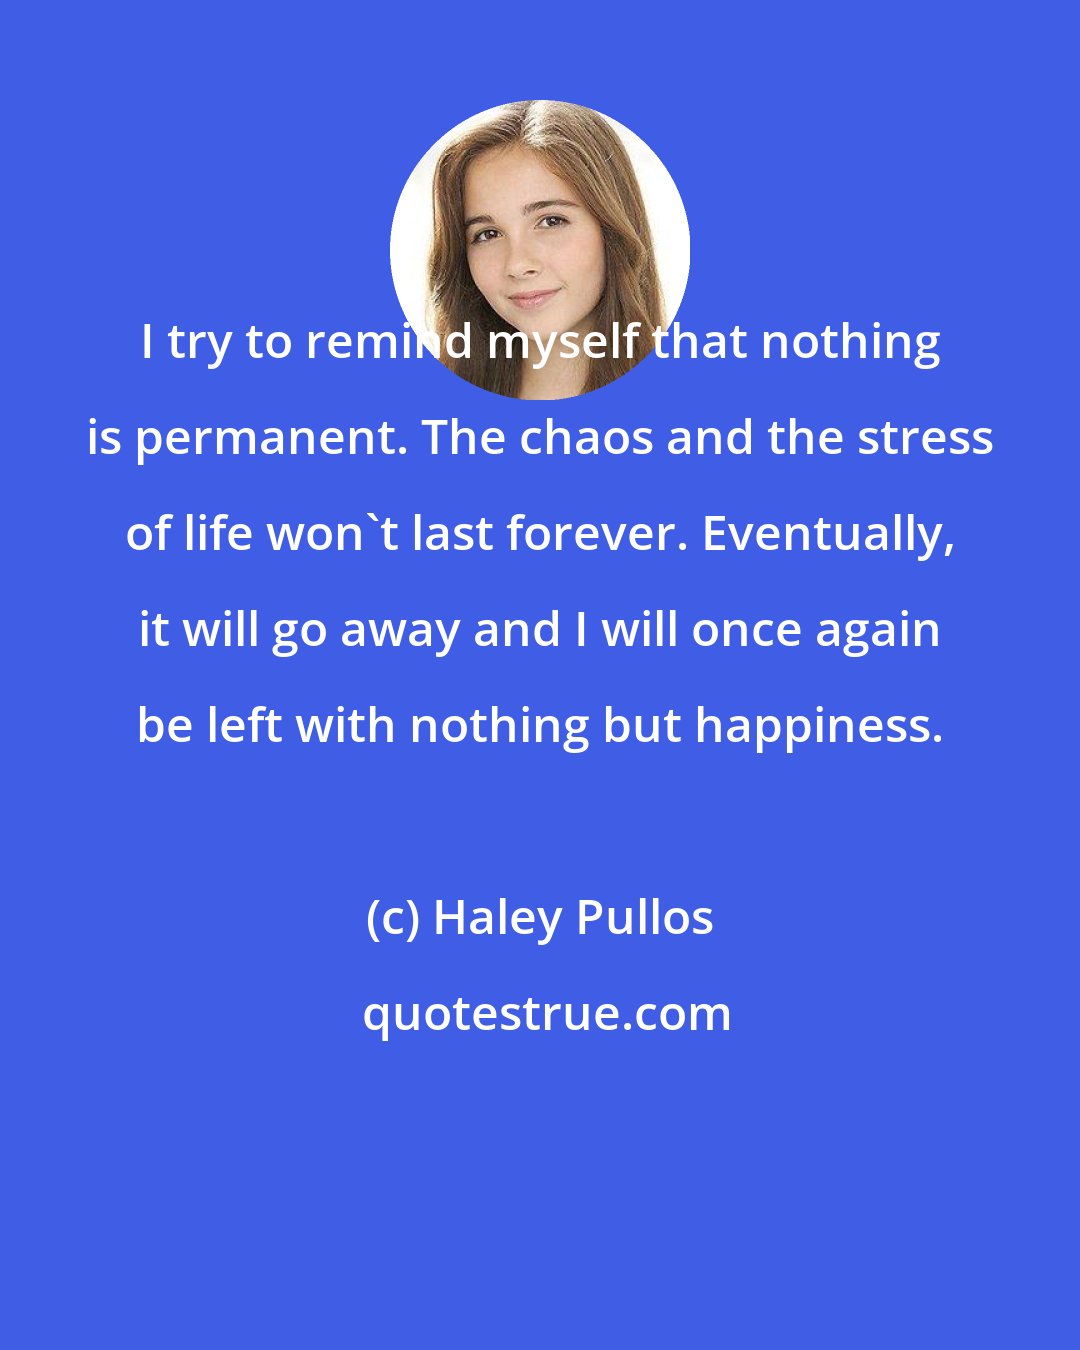 Haley Pullos: I try to remind myself that nothing is permanent. The chaos and the stress of life won't last forever. Eventually, it will go away and I will once again be left with nothing but happiness.